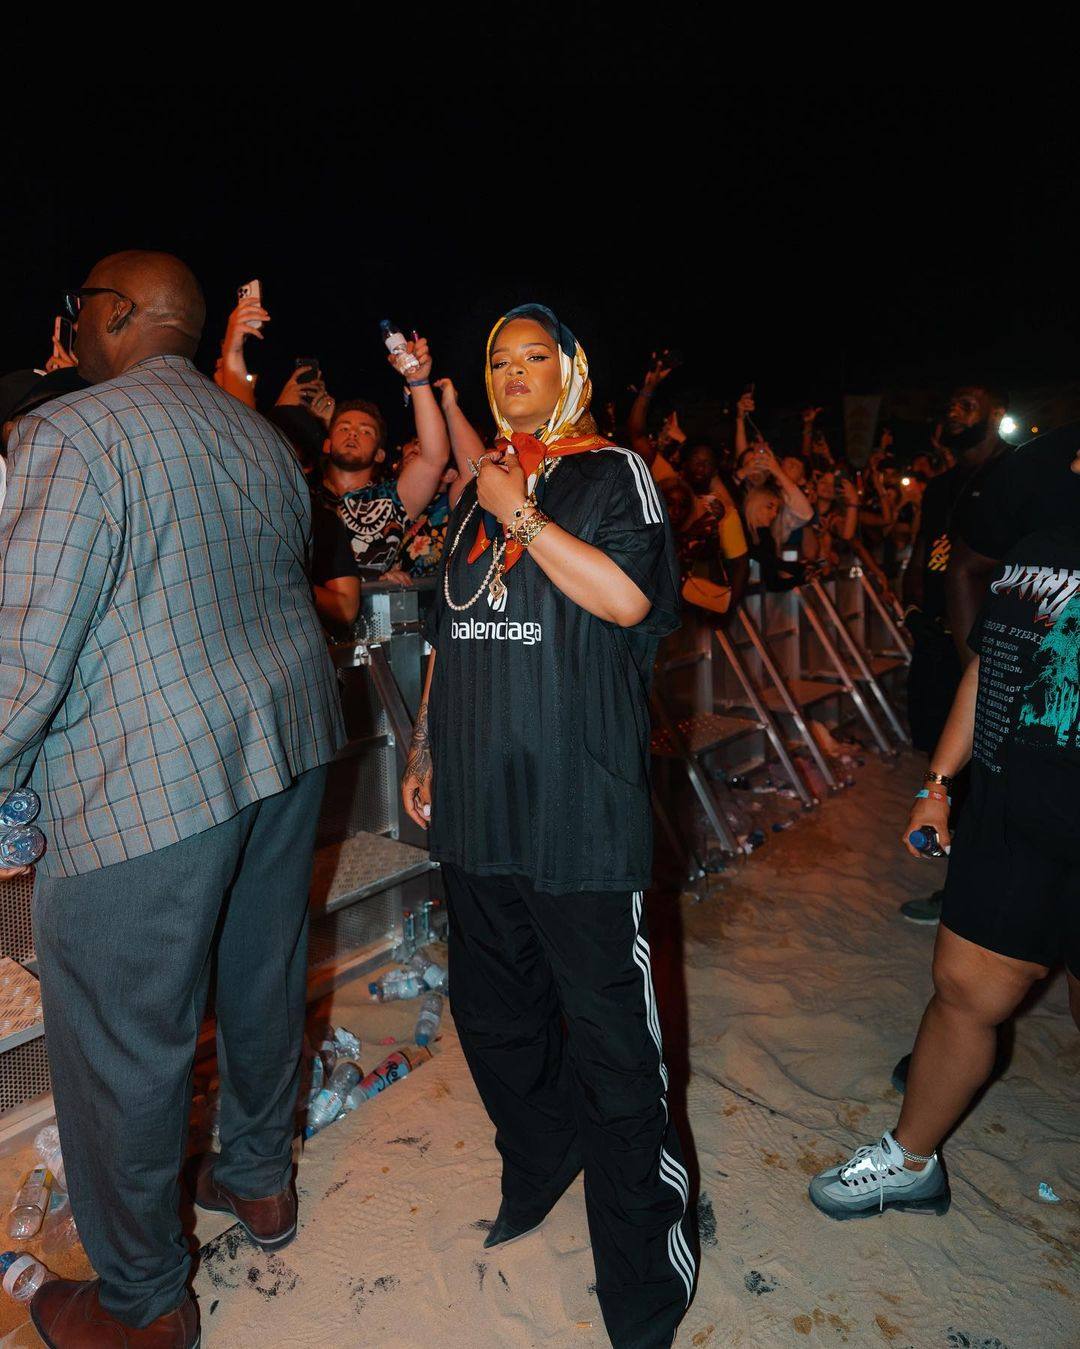 Rihanna at the Rolling Loud festival in Portugal in July wearing an oversized soccer shirt from a Balenciaga x Adidas collection. Together with fashion companies and social media, she is driving interest in a fashion look called blokecore. Photo: Instagram